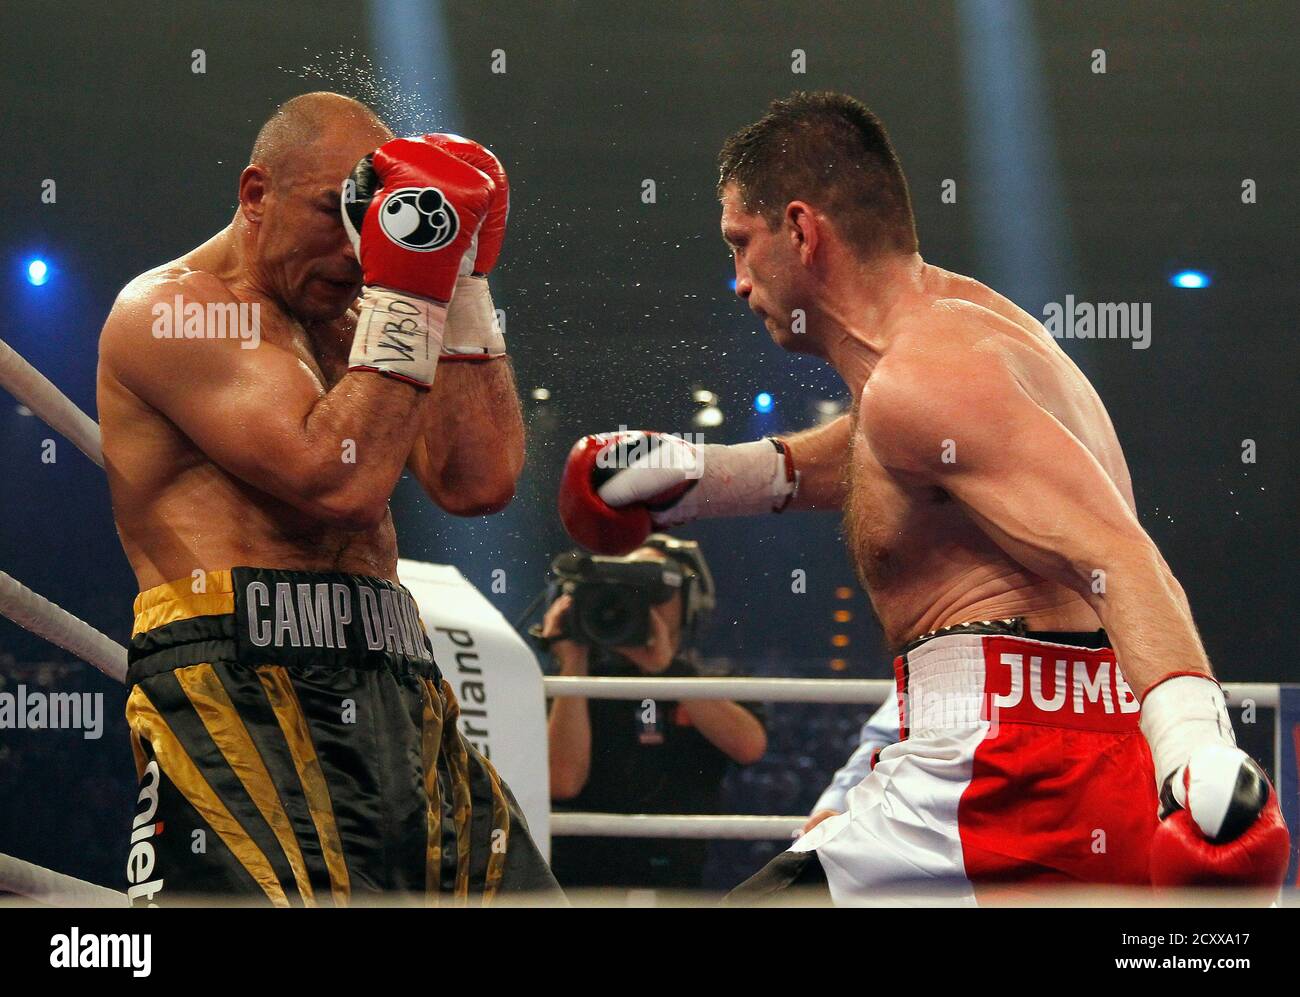 WBO Super Middleweight World Champion Arthur Abraham (L) of Germany holds  his guard up as Montenegro's Nikola Sjekloca throws a punch during their  fight in Berlin May 3, 2014. Abraham successfully defended